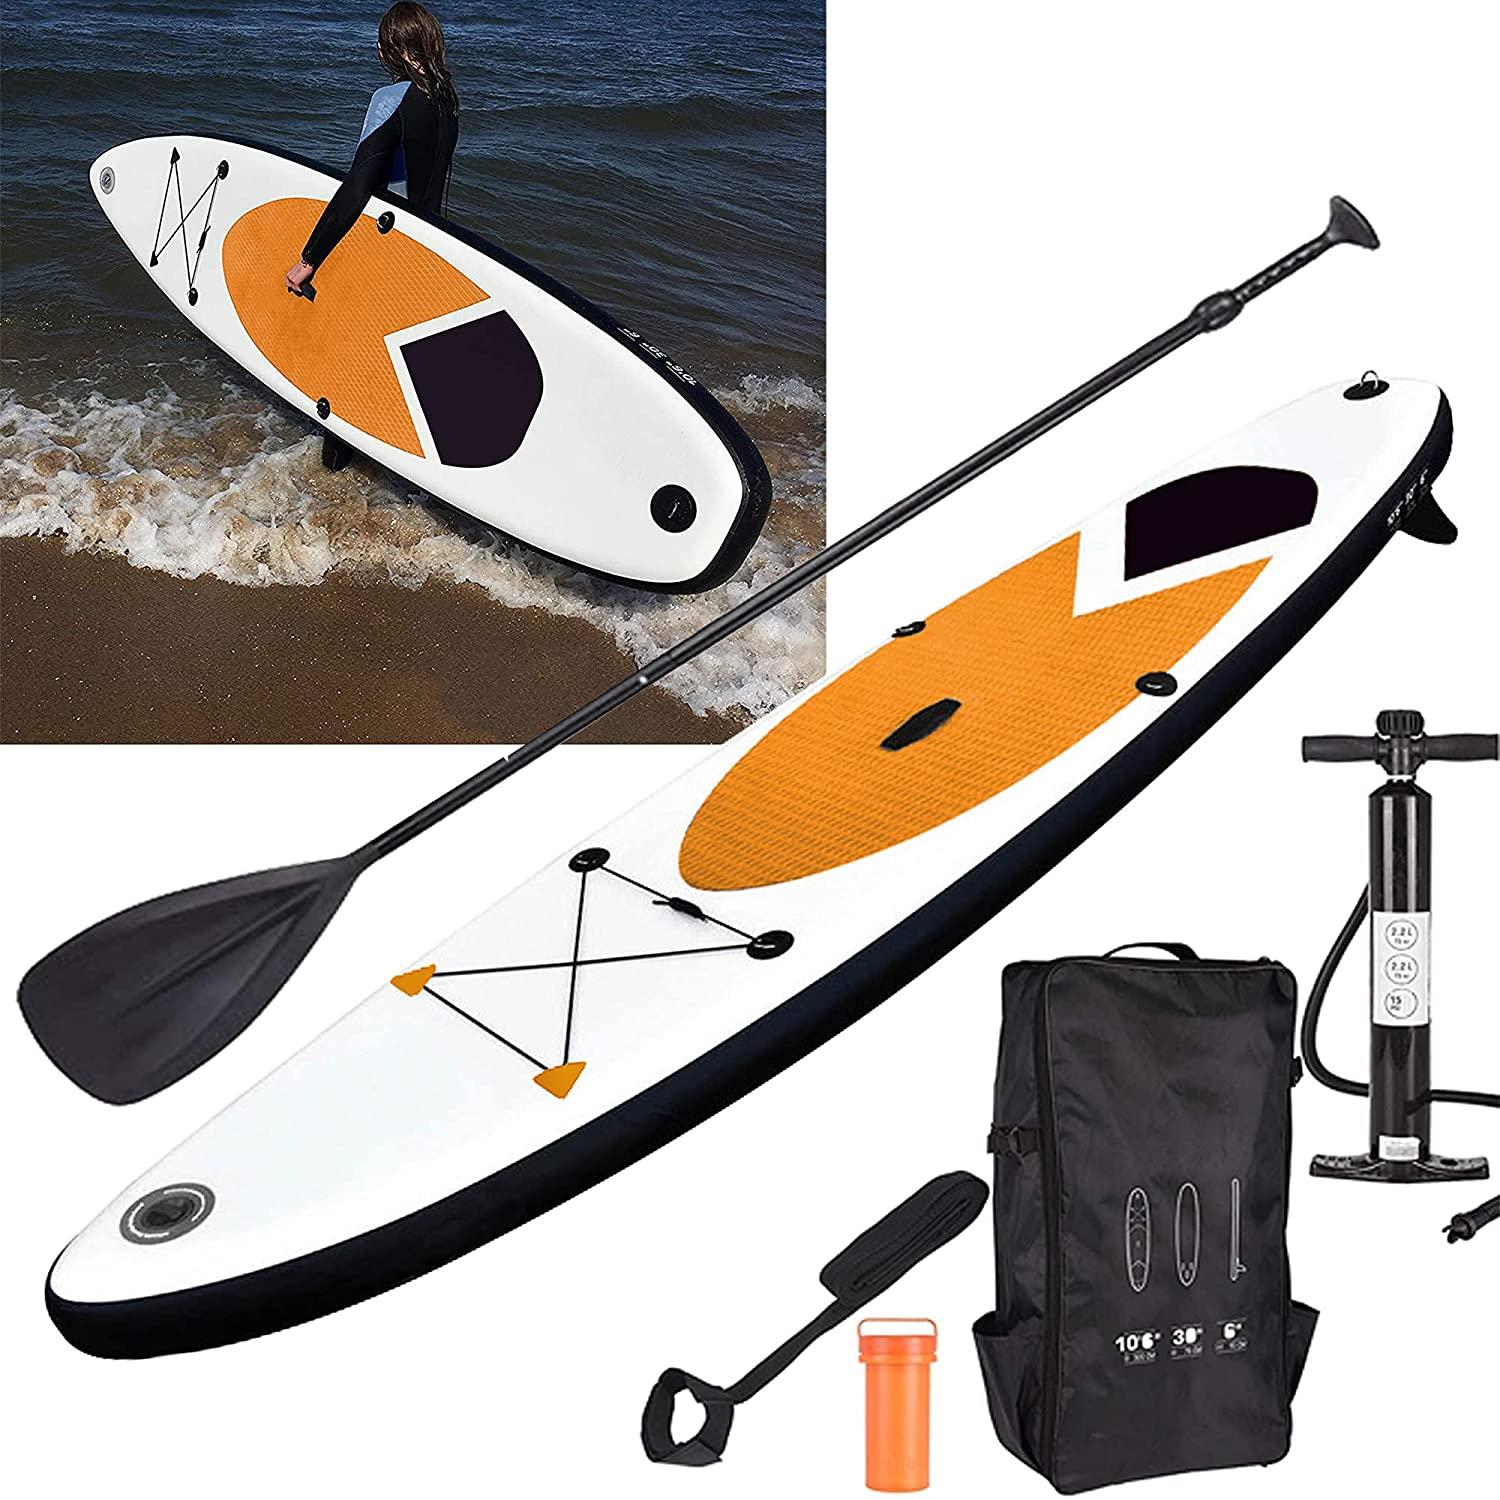 Inflatable 320 cm SUP Stand Up Paddle Board by Geezy - UKBuyZone